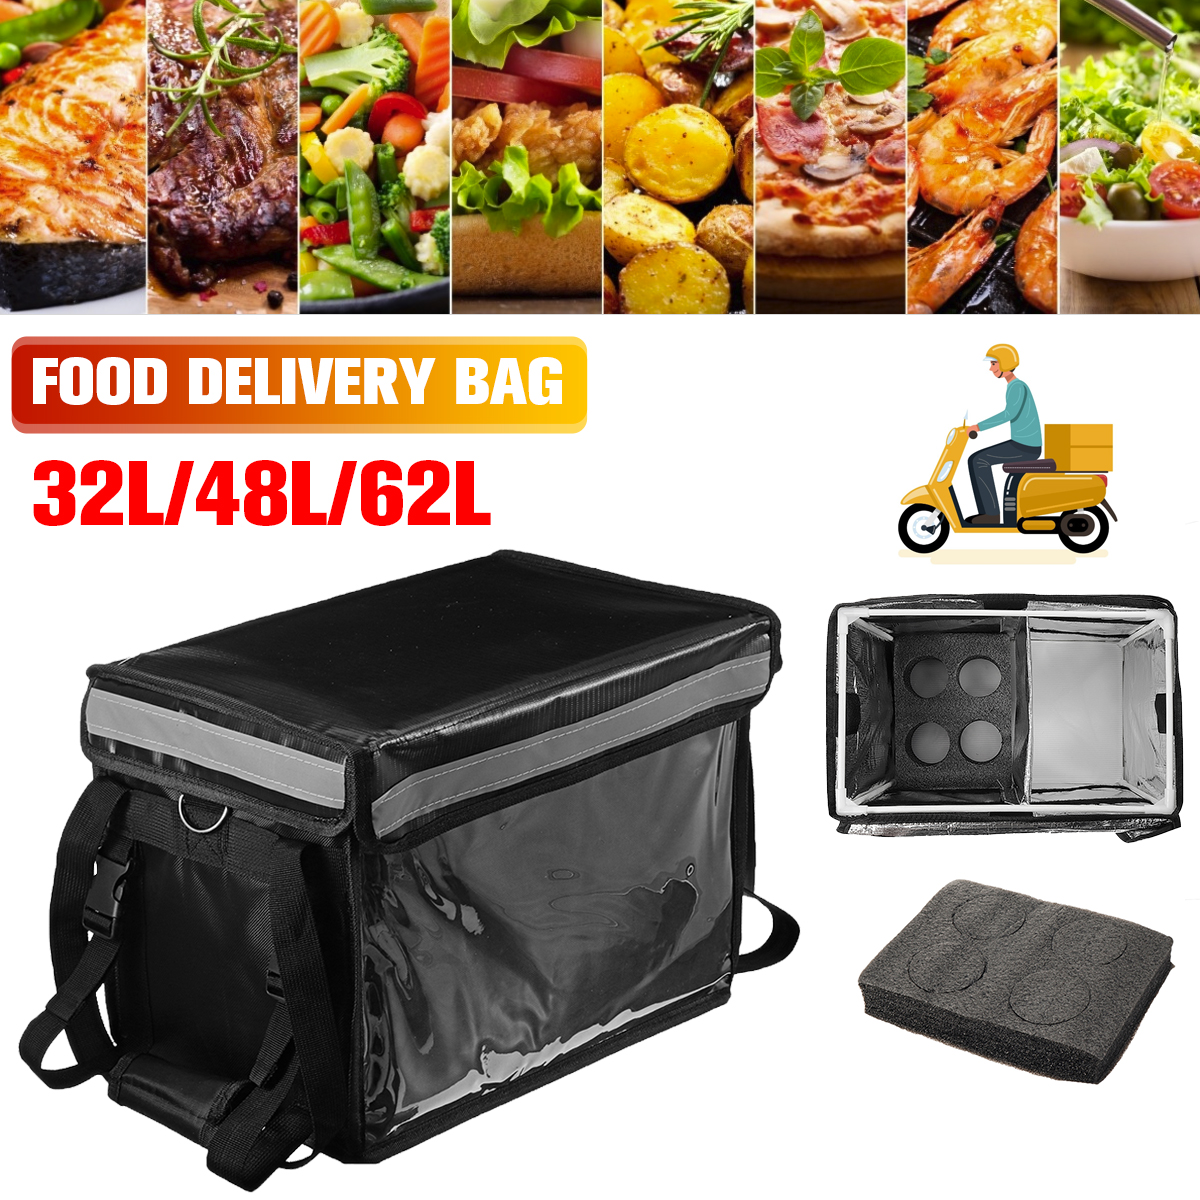 32L Thermal Insulated Bag Food Business food delivery bag motorcycle ...